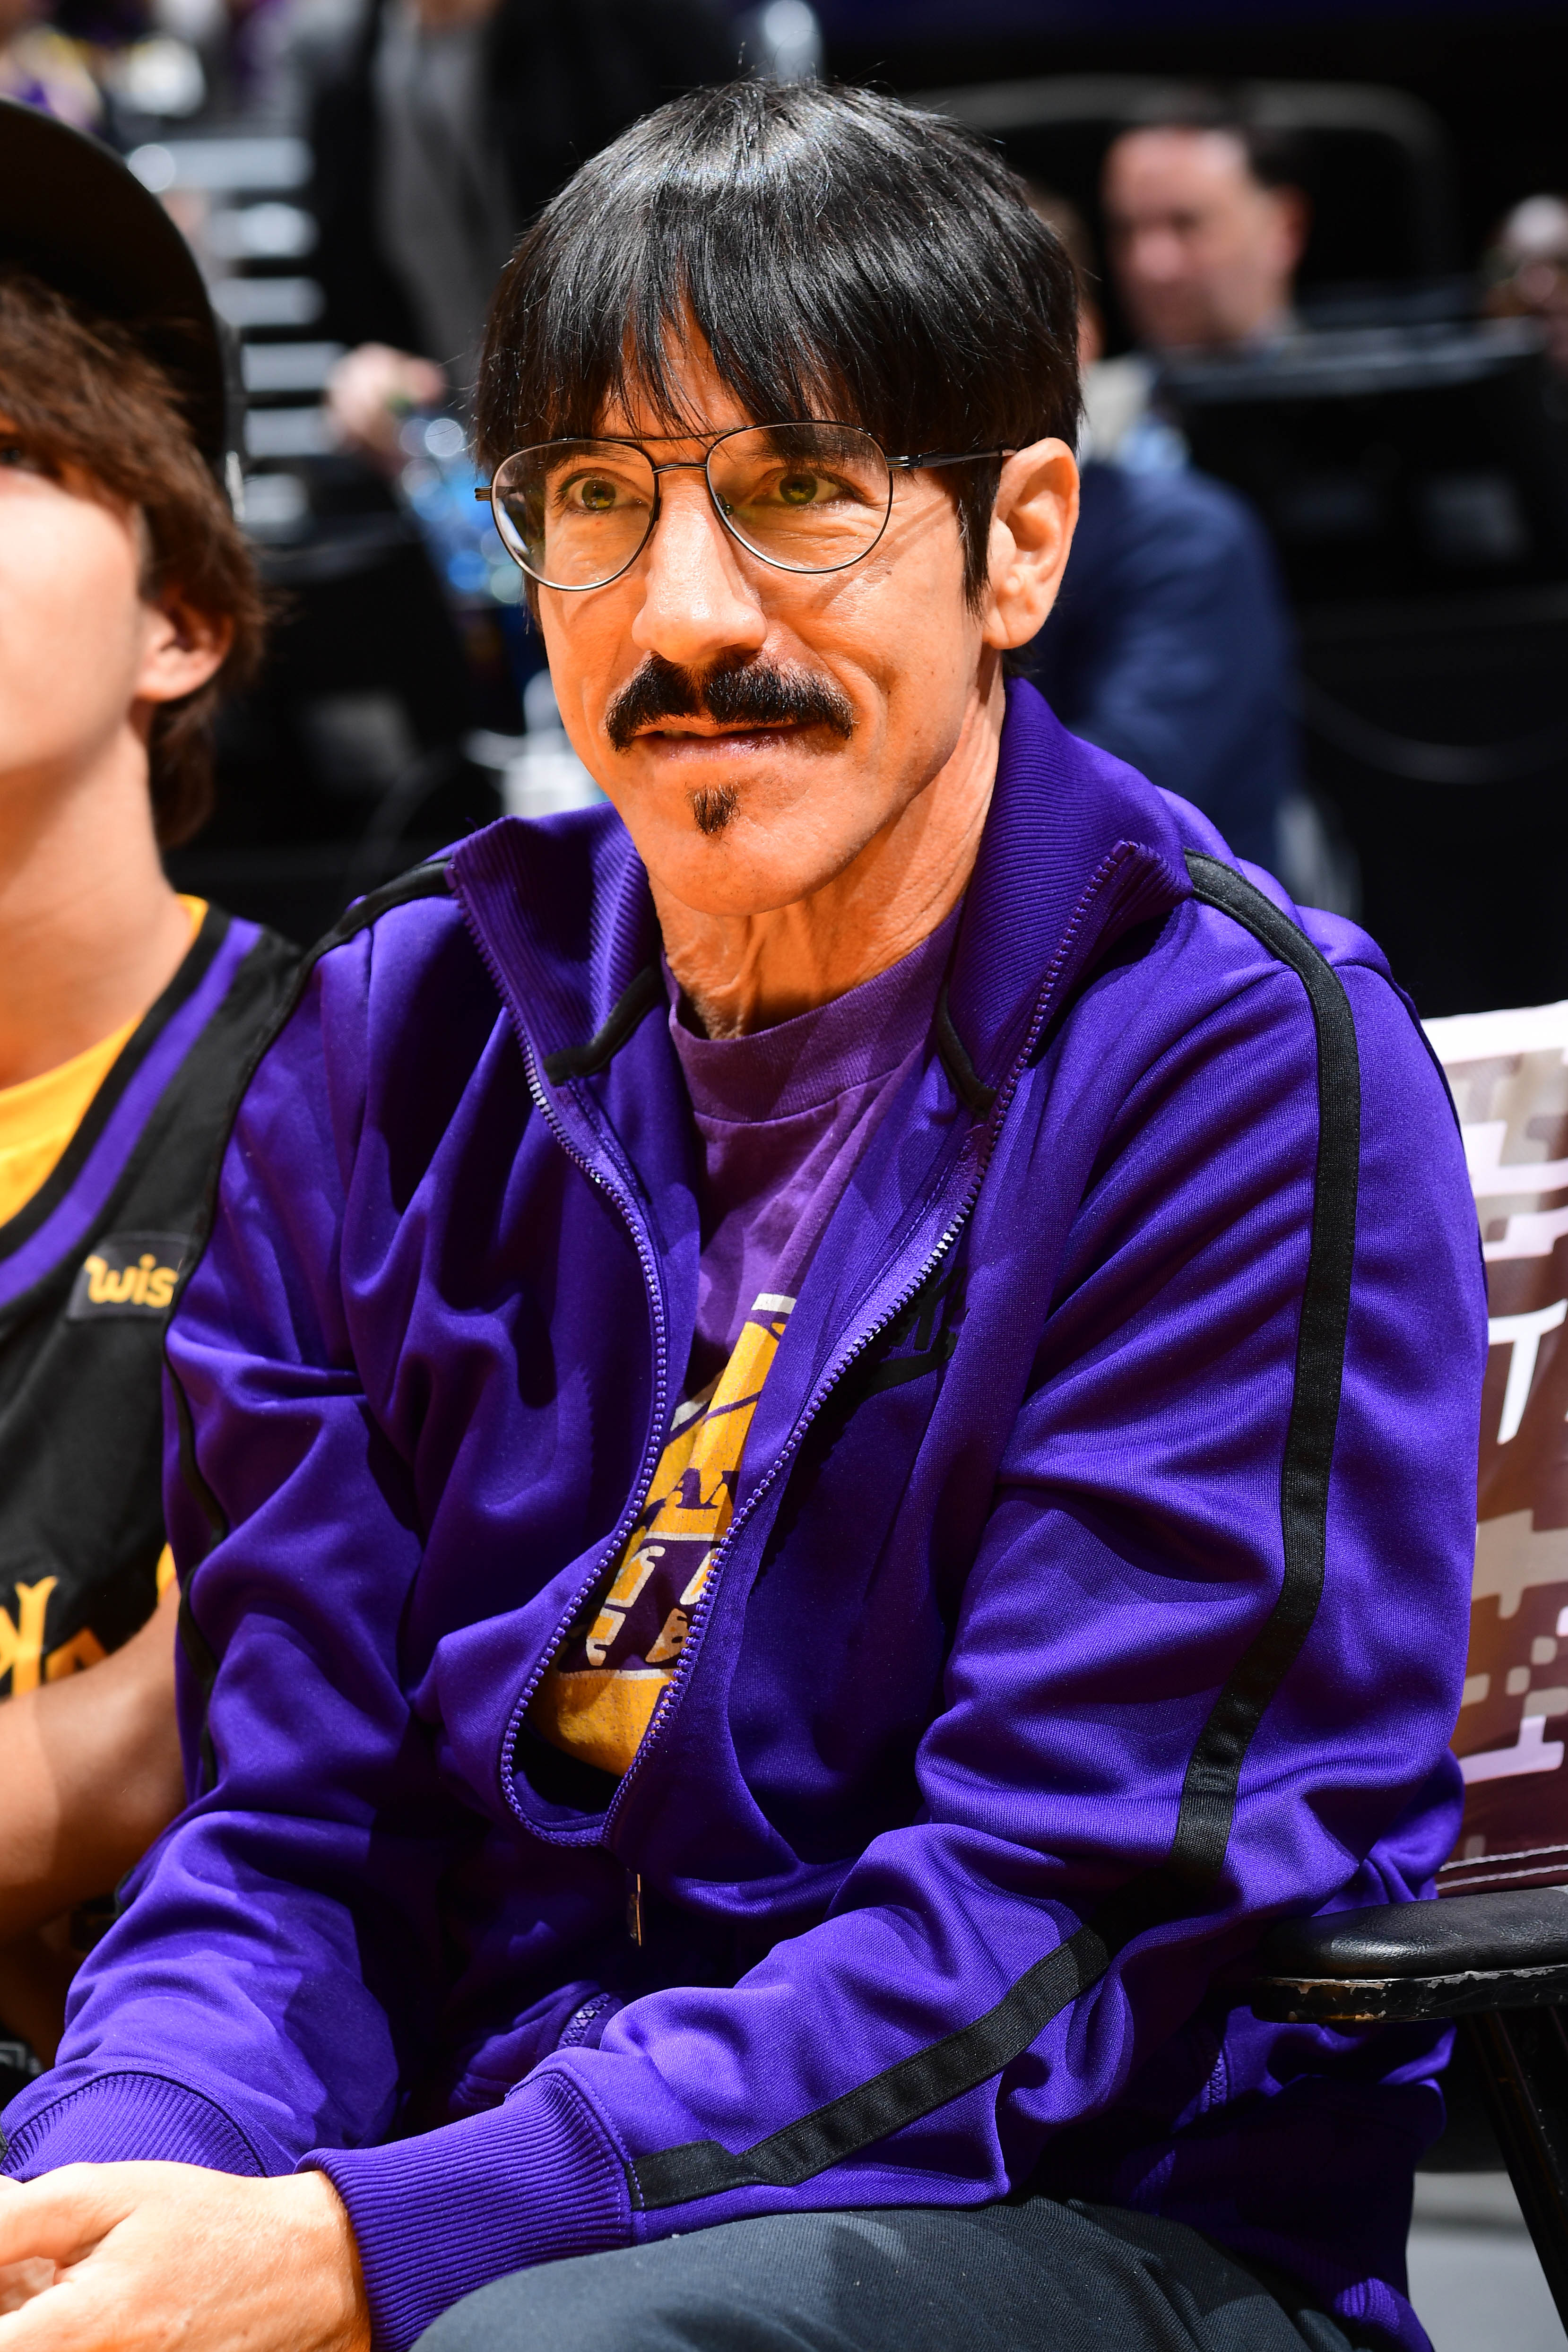 Anthony Kiedis at an NBA game on November 20, 2022, in Los Angeles, California. | Source: Getty Images